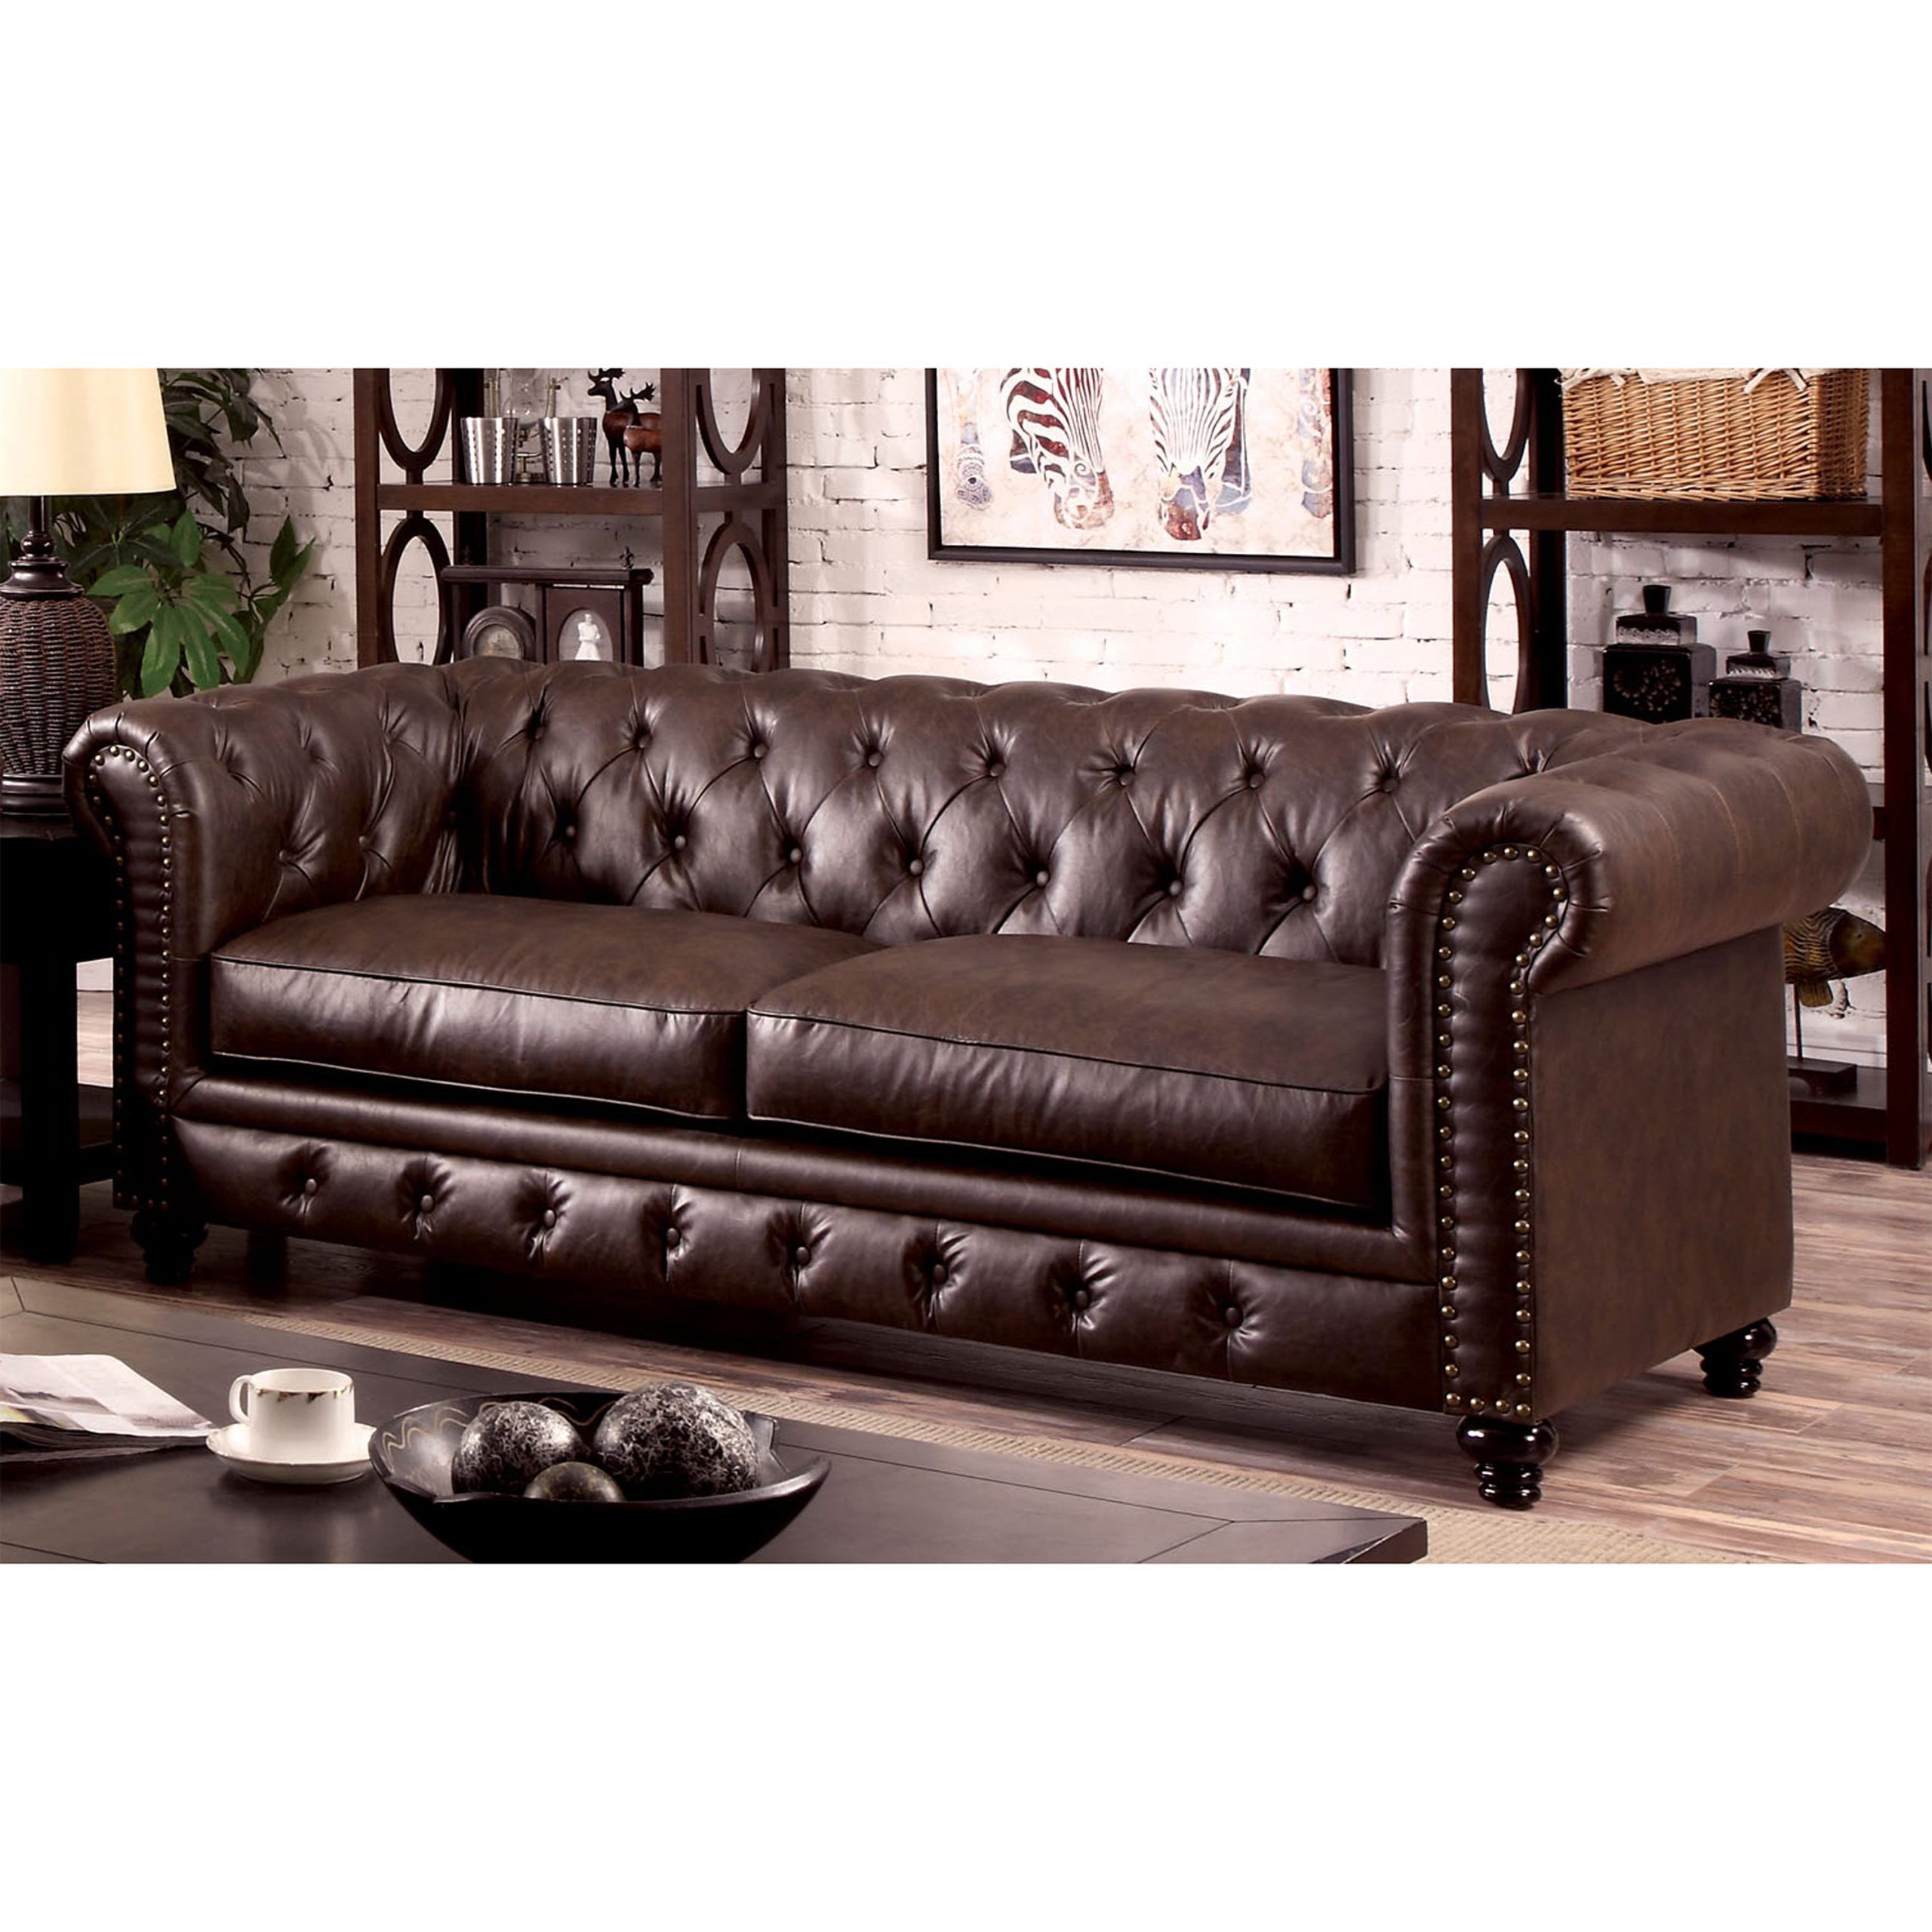 Furniture Of America Tufted Glam Faux Leather Nyssa Tuxedo Sofa, Brown For Faux Leather Sofas In Dark Brown (Gallery 5 of 20)